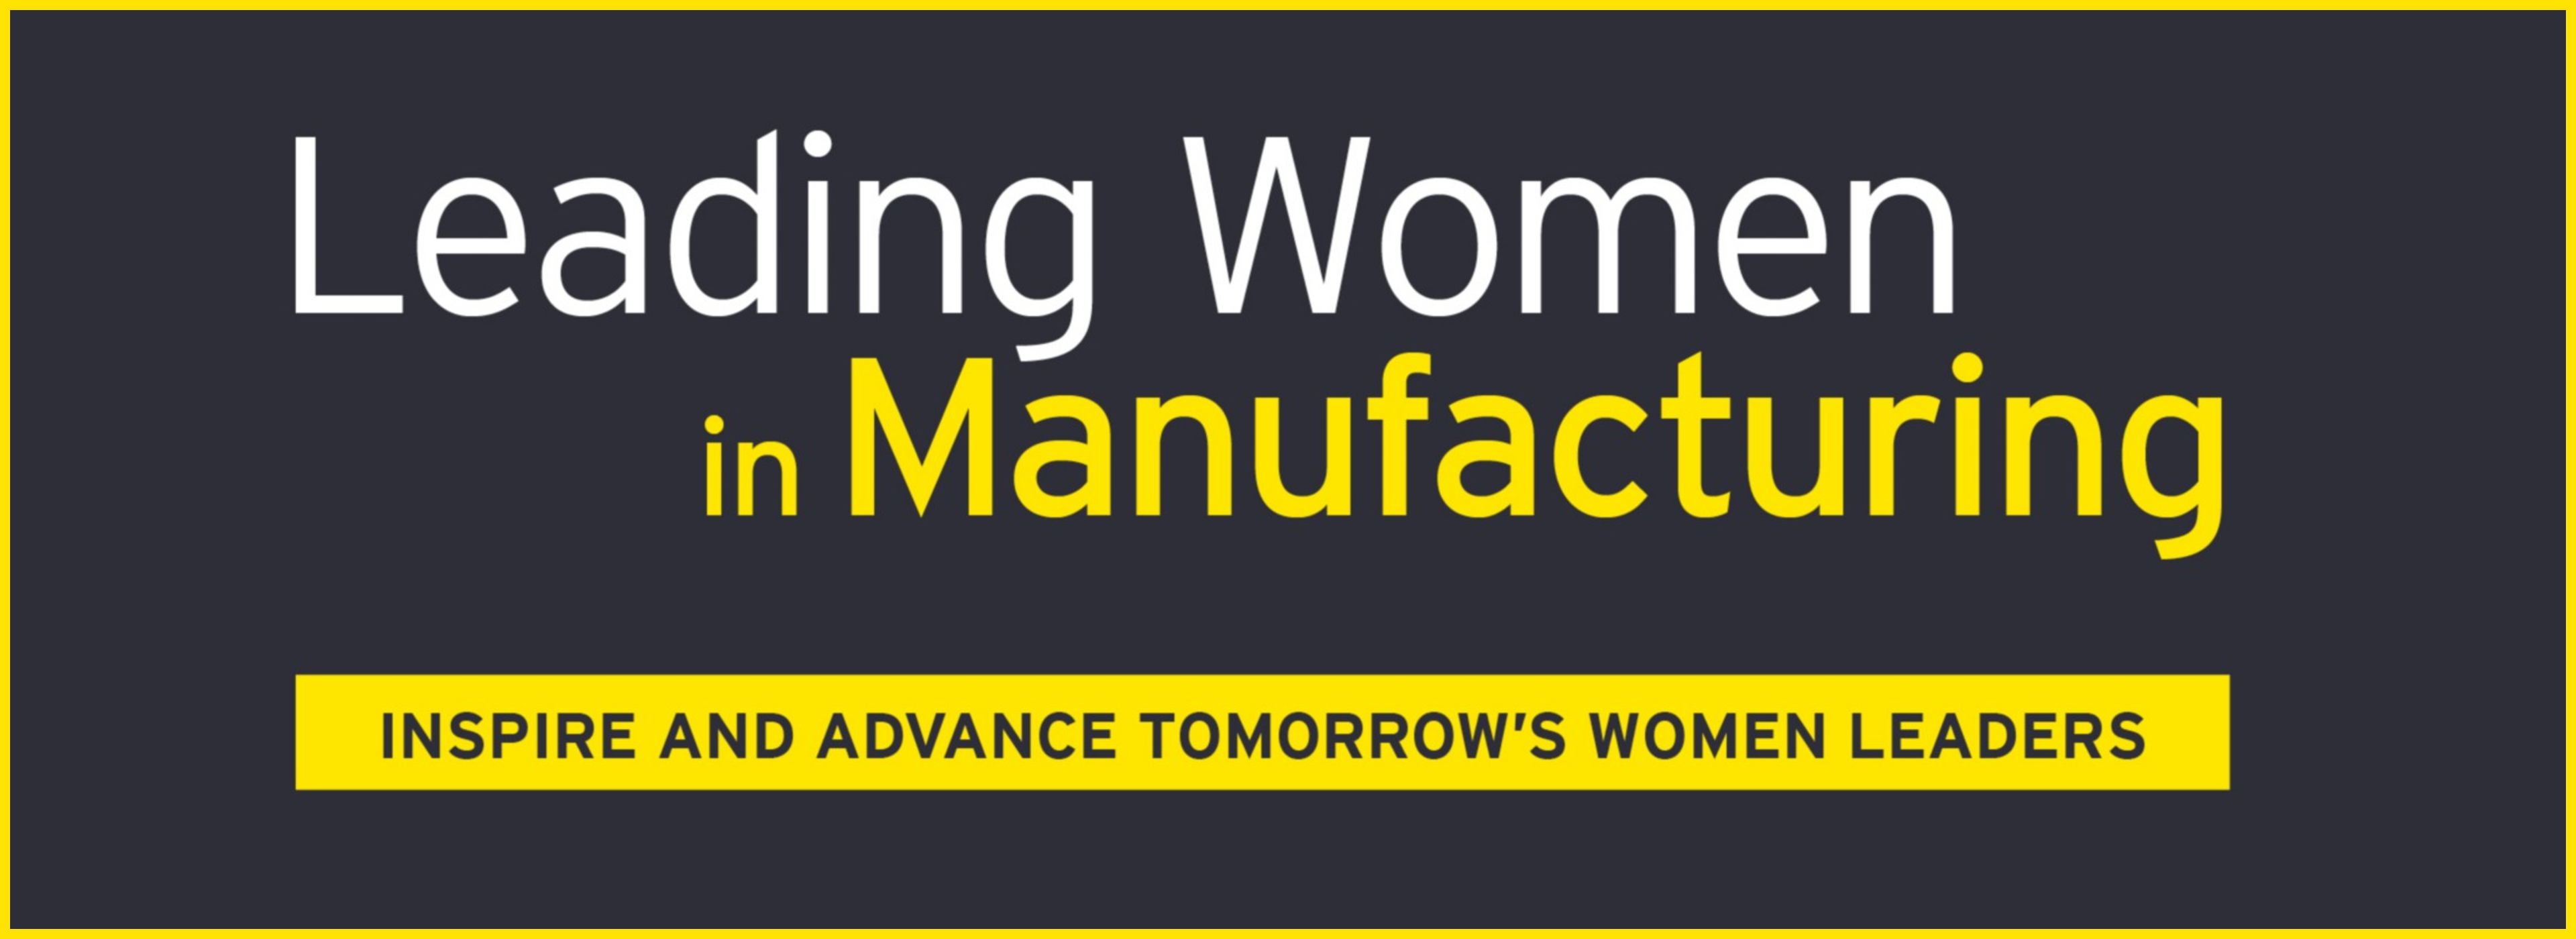 Leading Women in Manufacturing